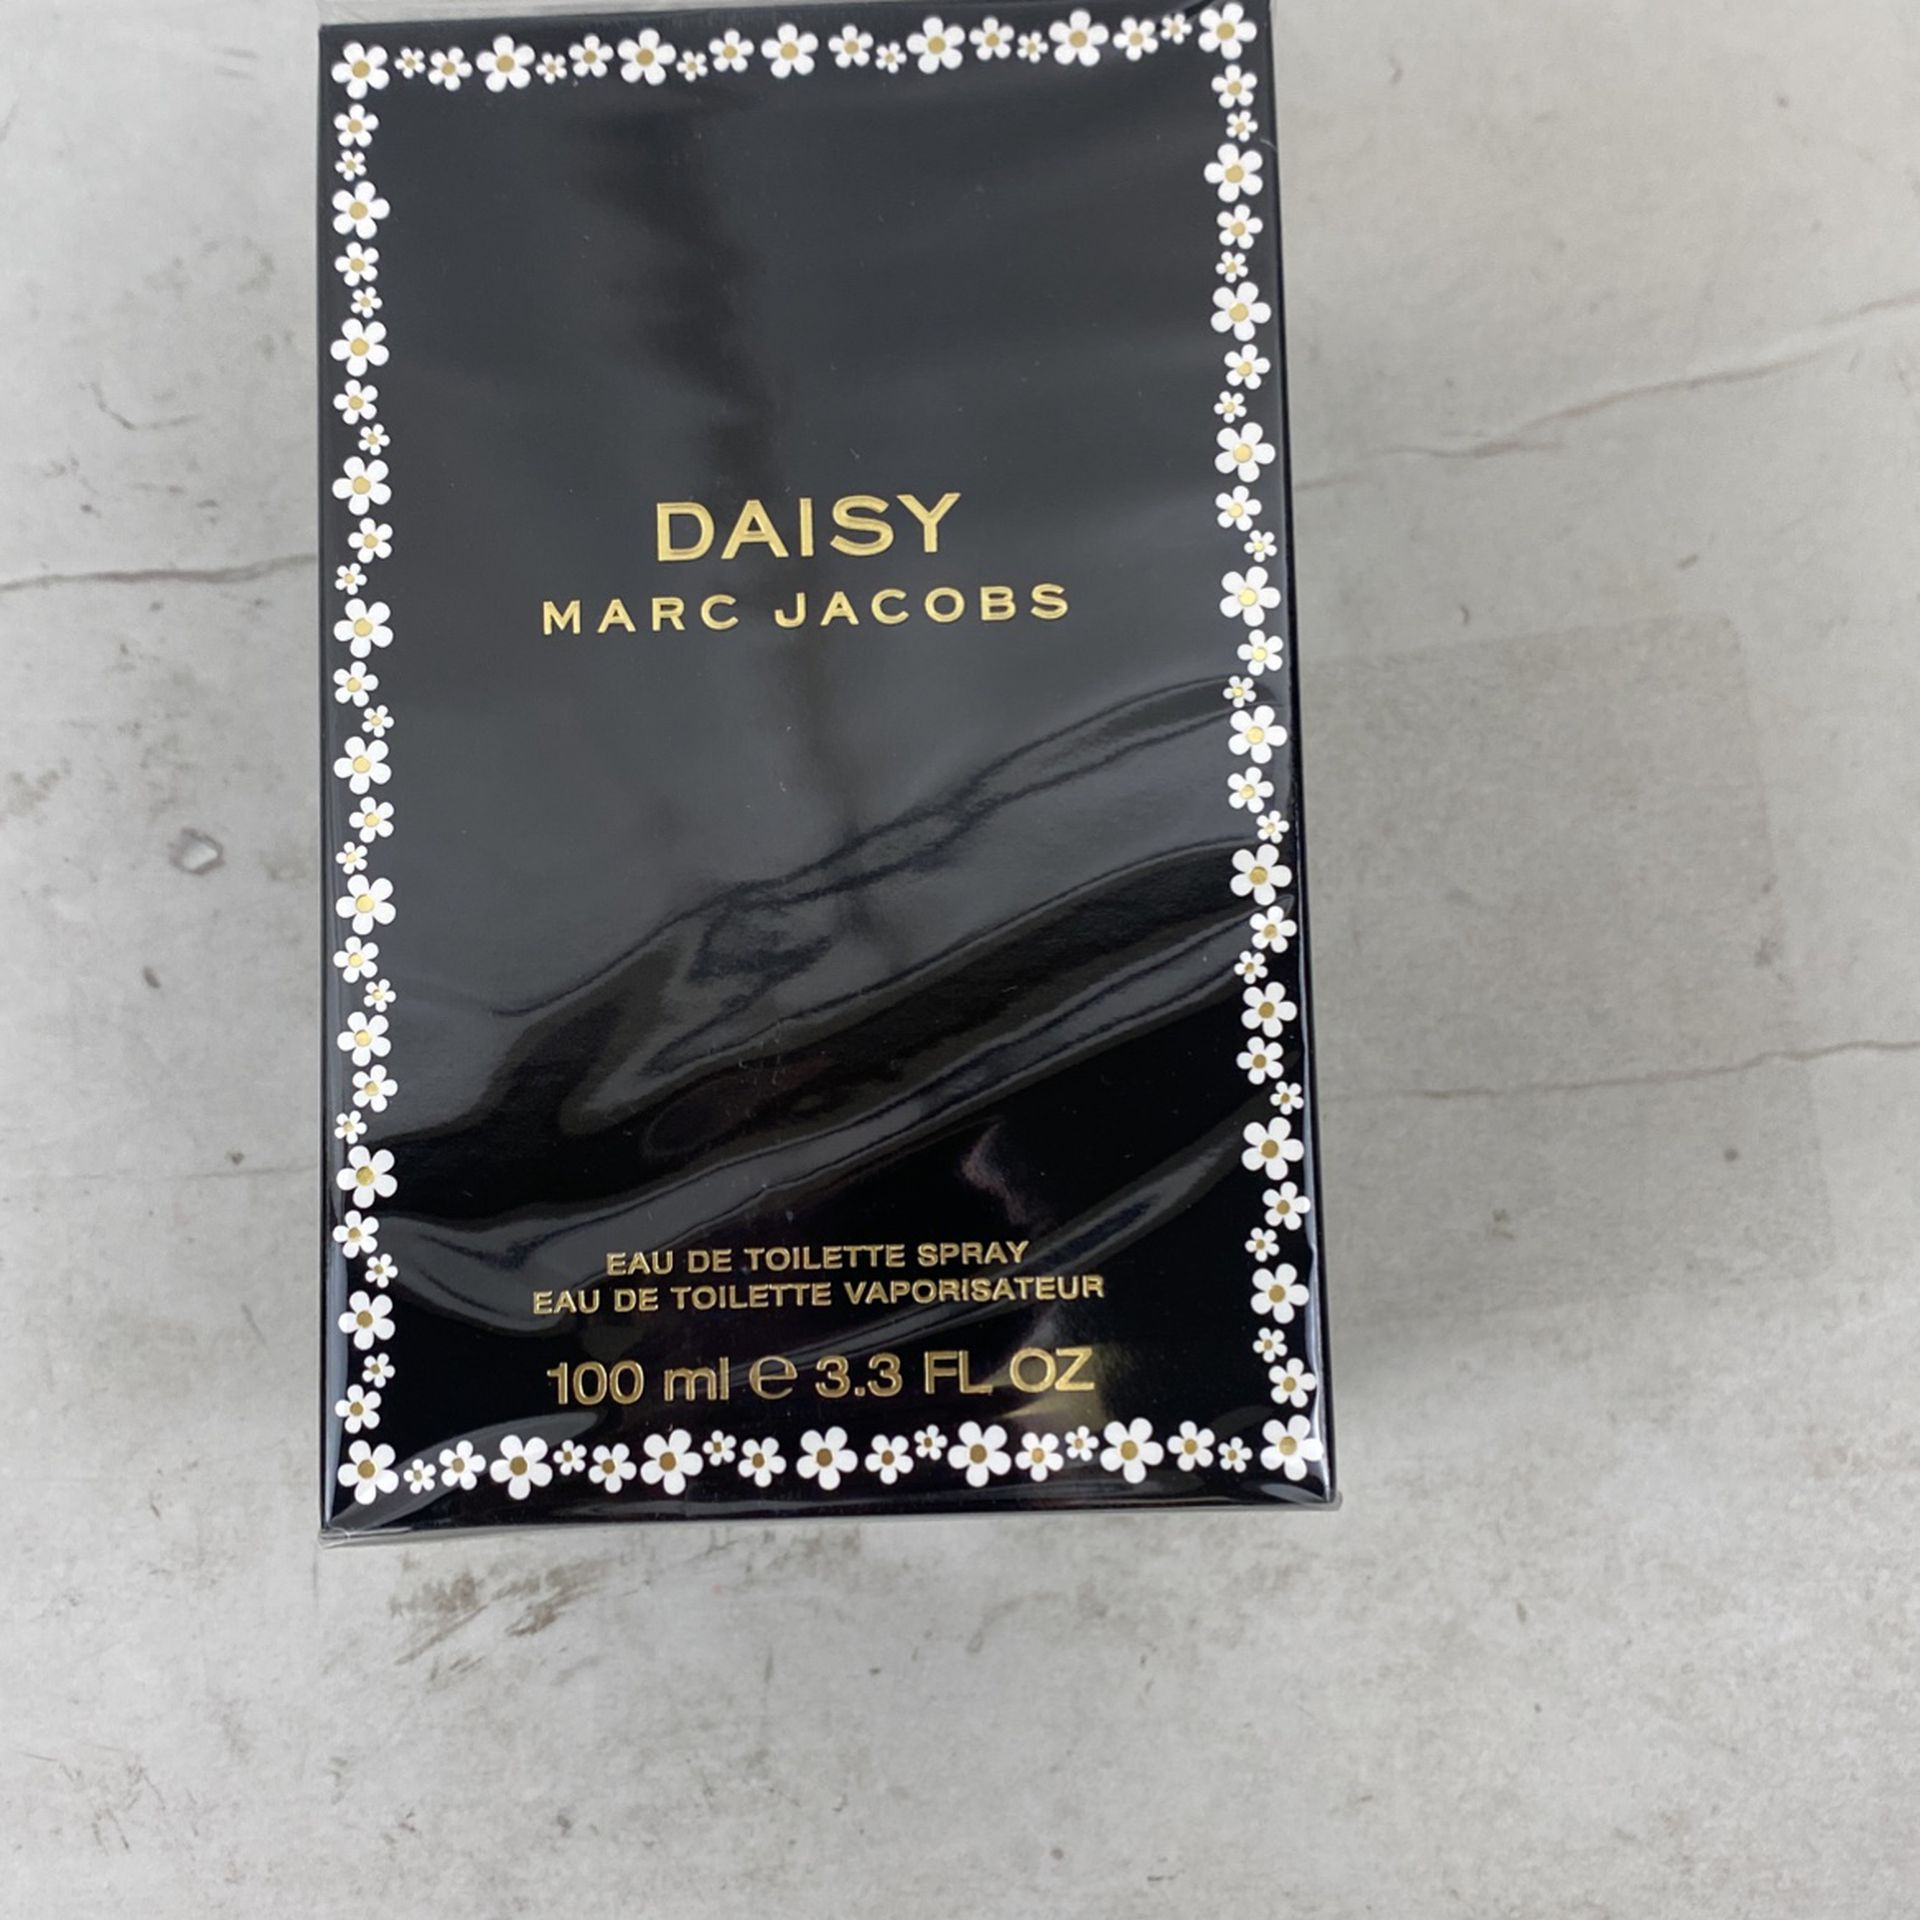 Marc Jacobs Daisy EDT Perfume 100ml for Sale in Las Vegas, NV - OfferUp